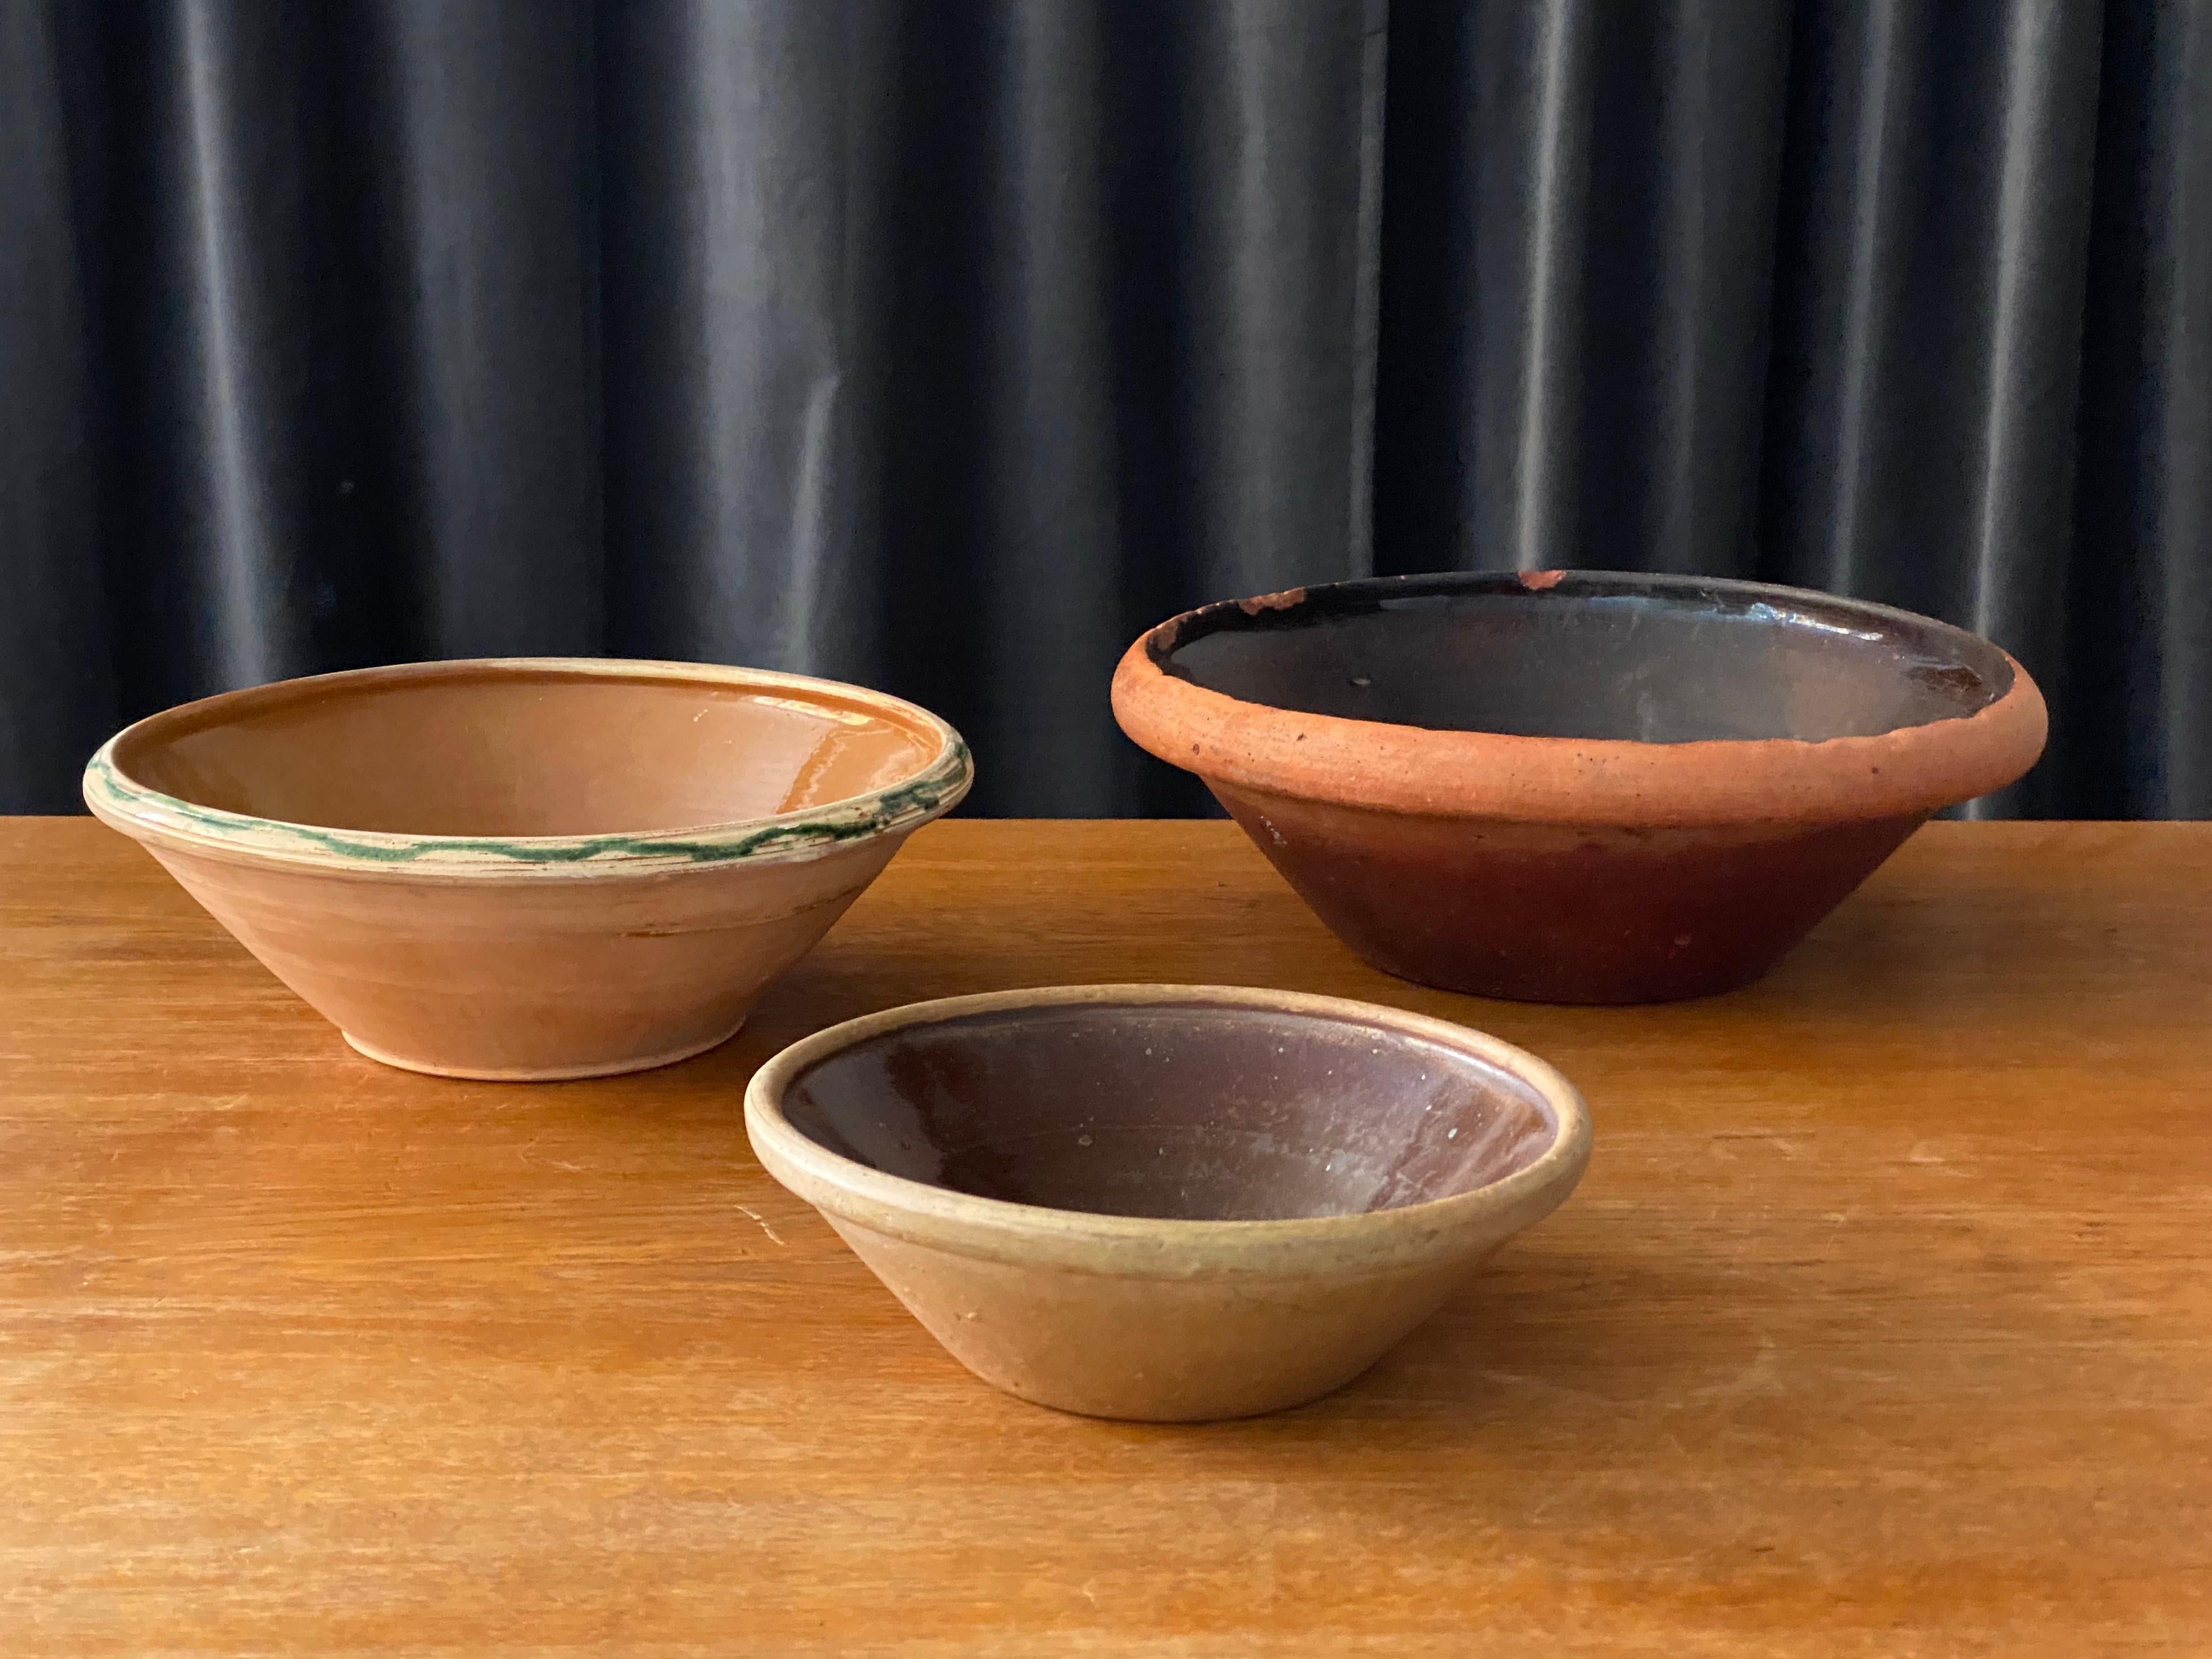 An antique and unique set of farmer’s ceramic pottery bowls. Produced in Sweden, 19th century. Examples from one collection, in different glazes with hand painted details. 
 
Dimensions large to small (in cm):

D 32, H 11.5
D 17.75, H 10.5
D